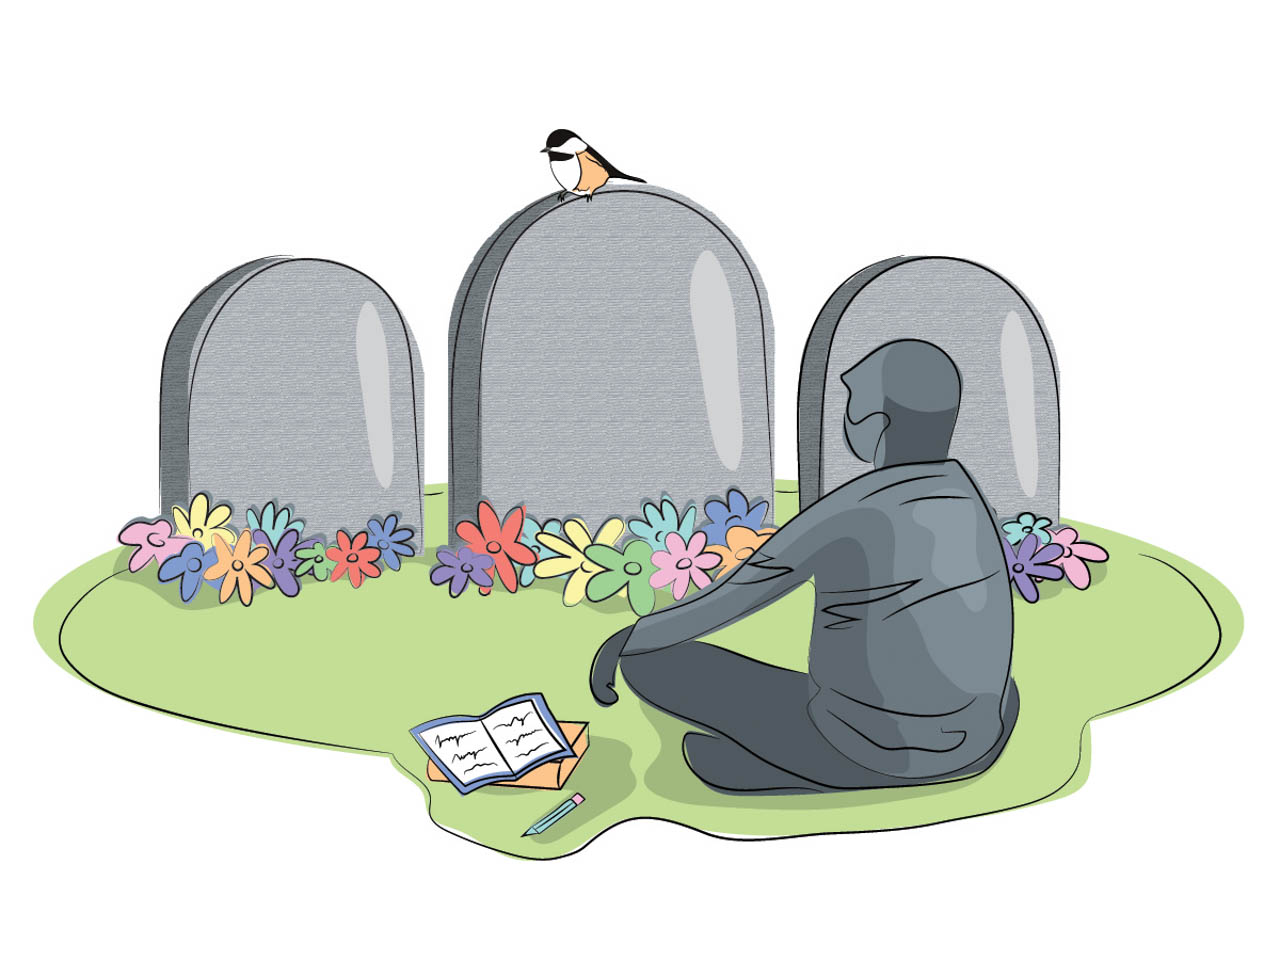 Illustration by Brielle Quon of a person sitting thoughtfully at headstones with a notebook. Colourful flowers and a bird surround the gravestones.